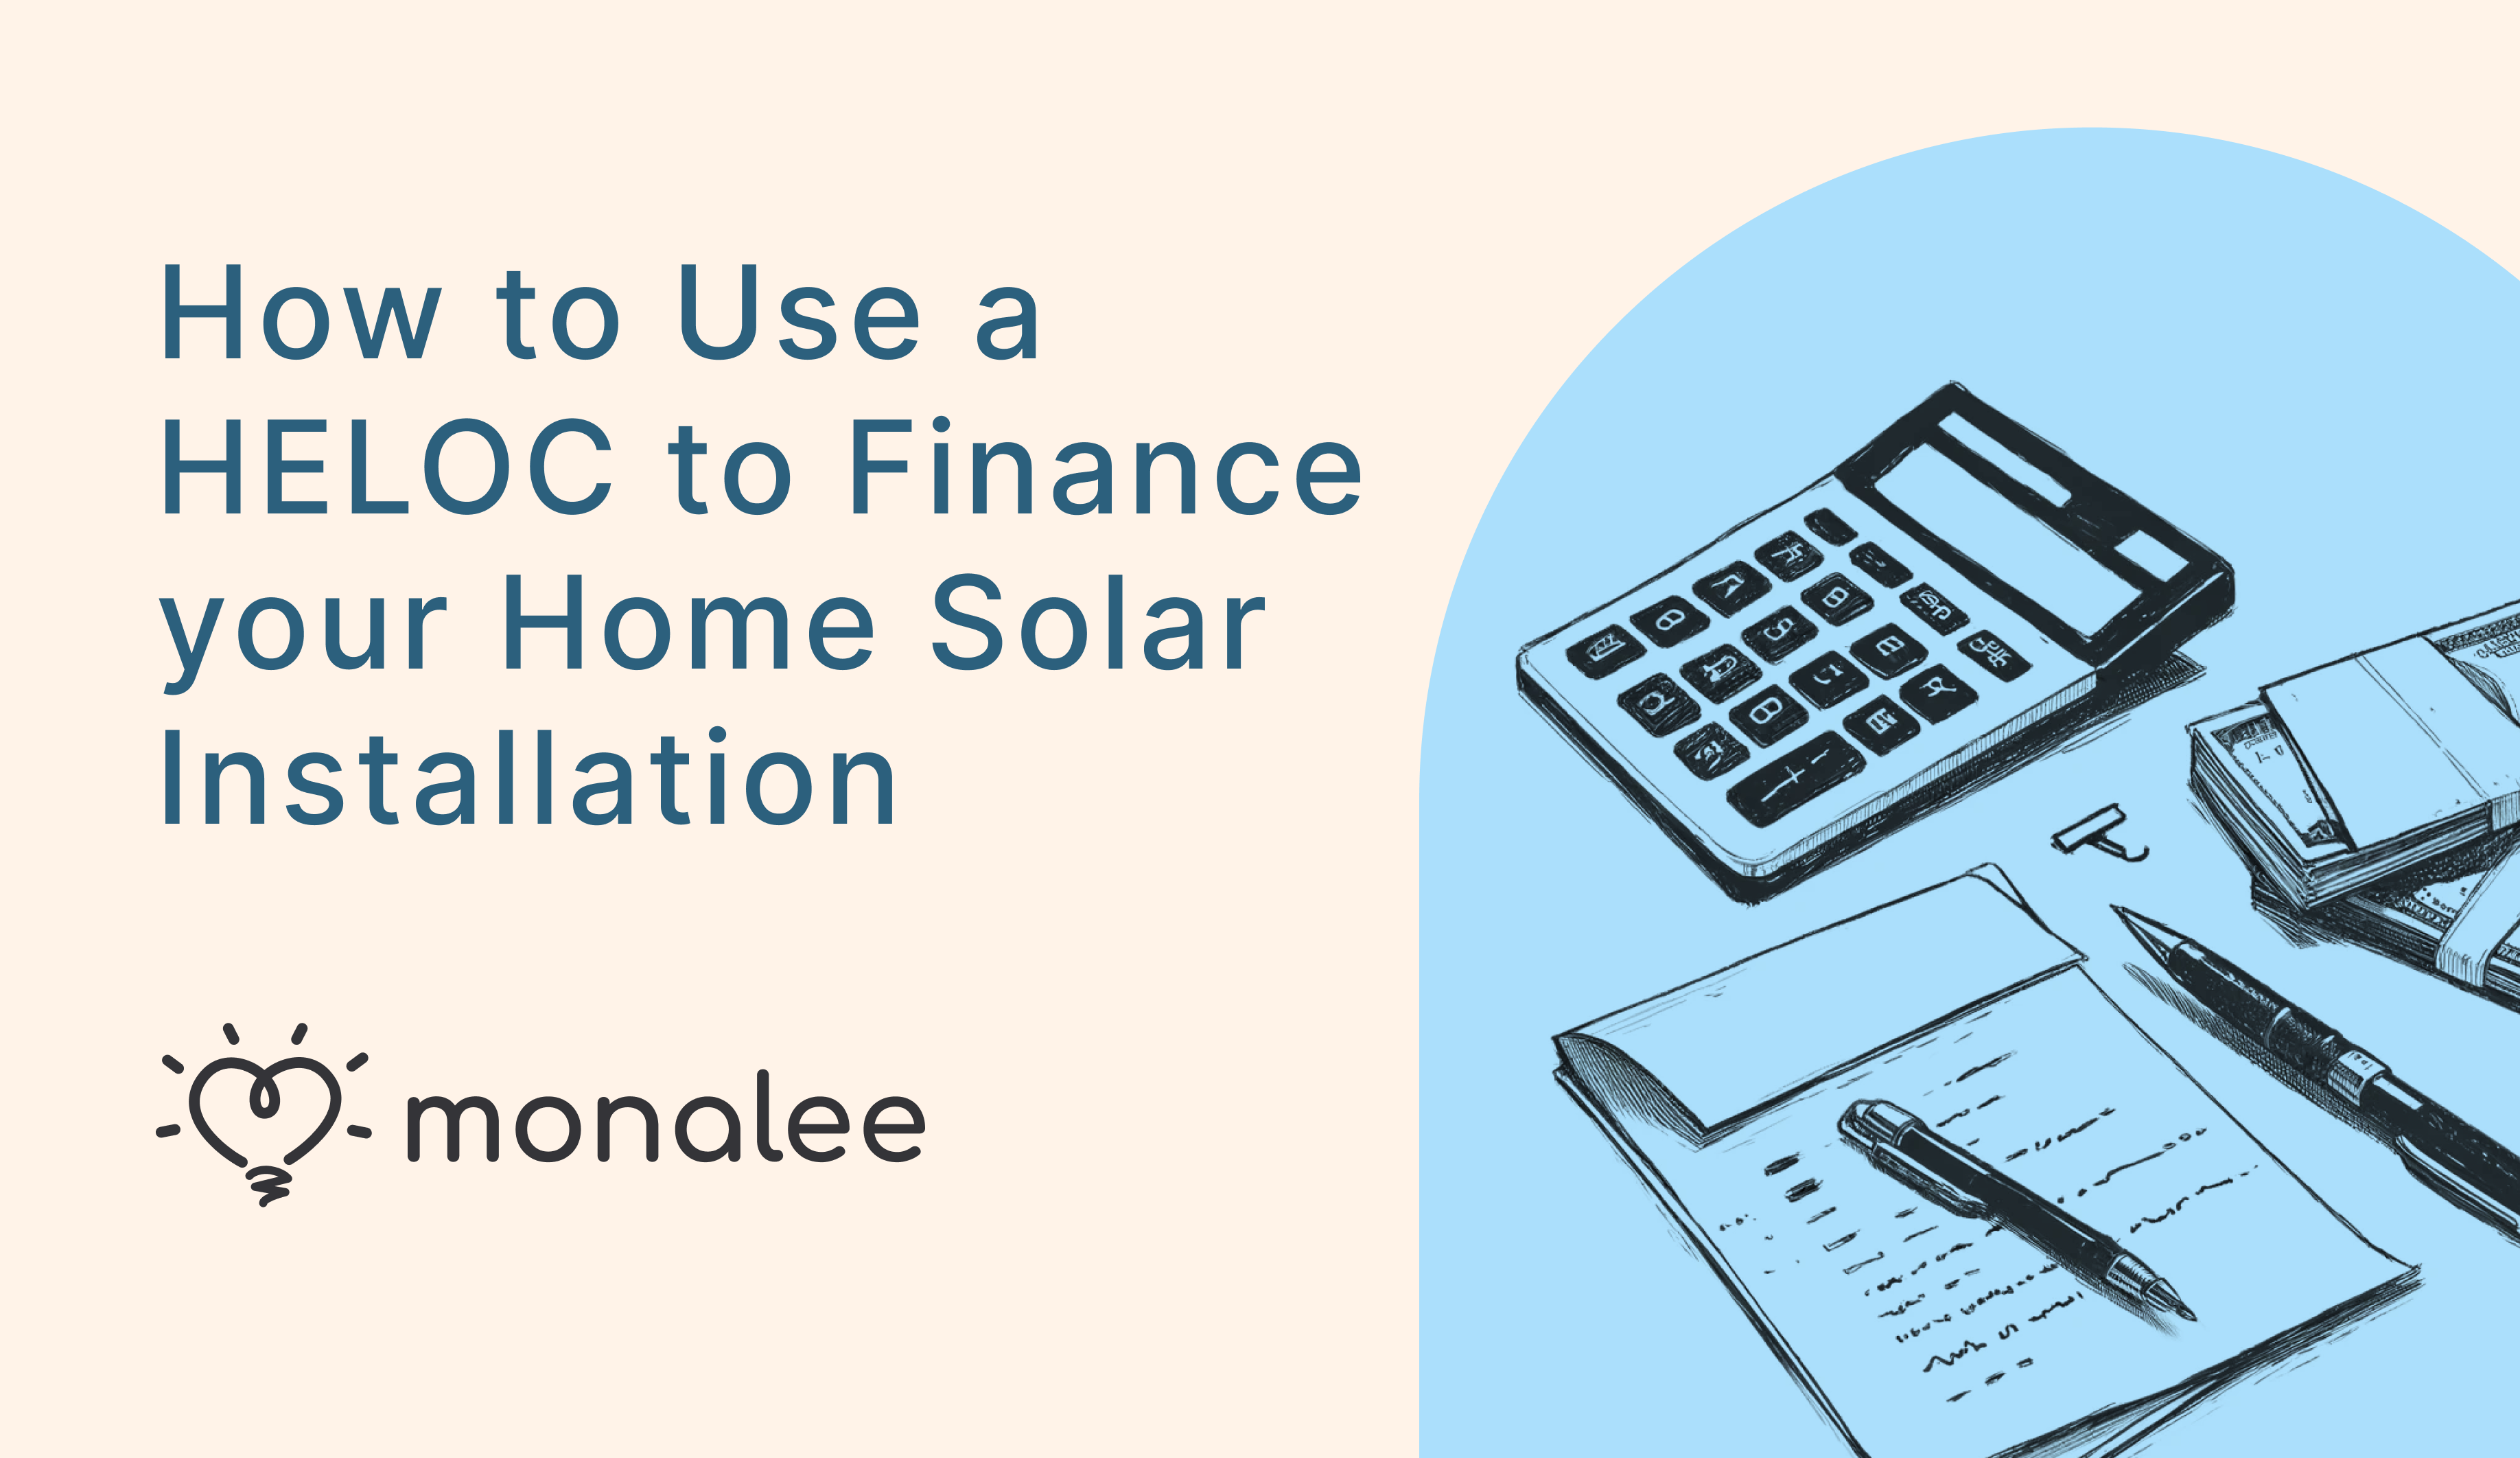 How to Use a HELOC to Finance your Home Solar Installation